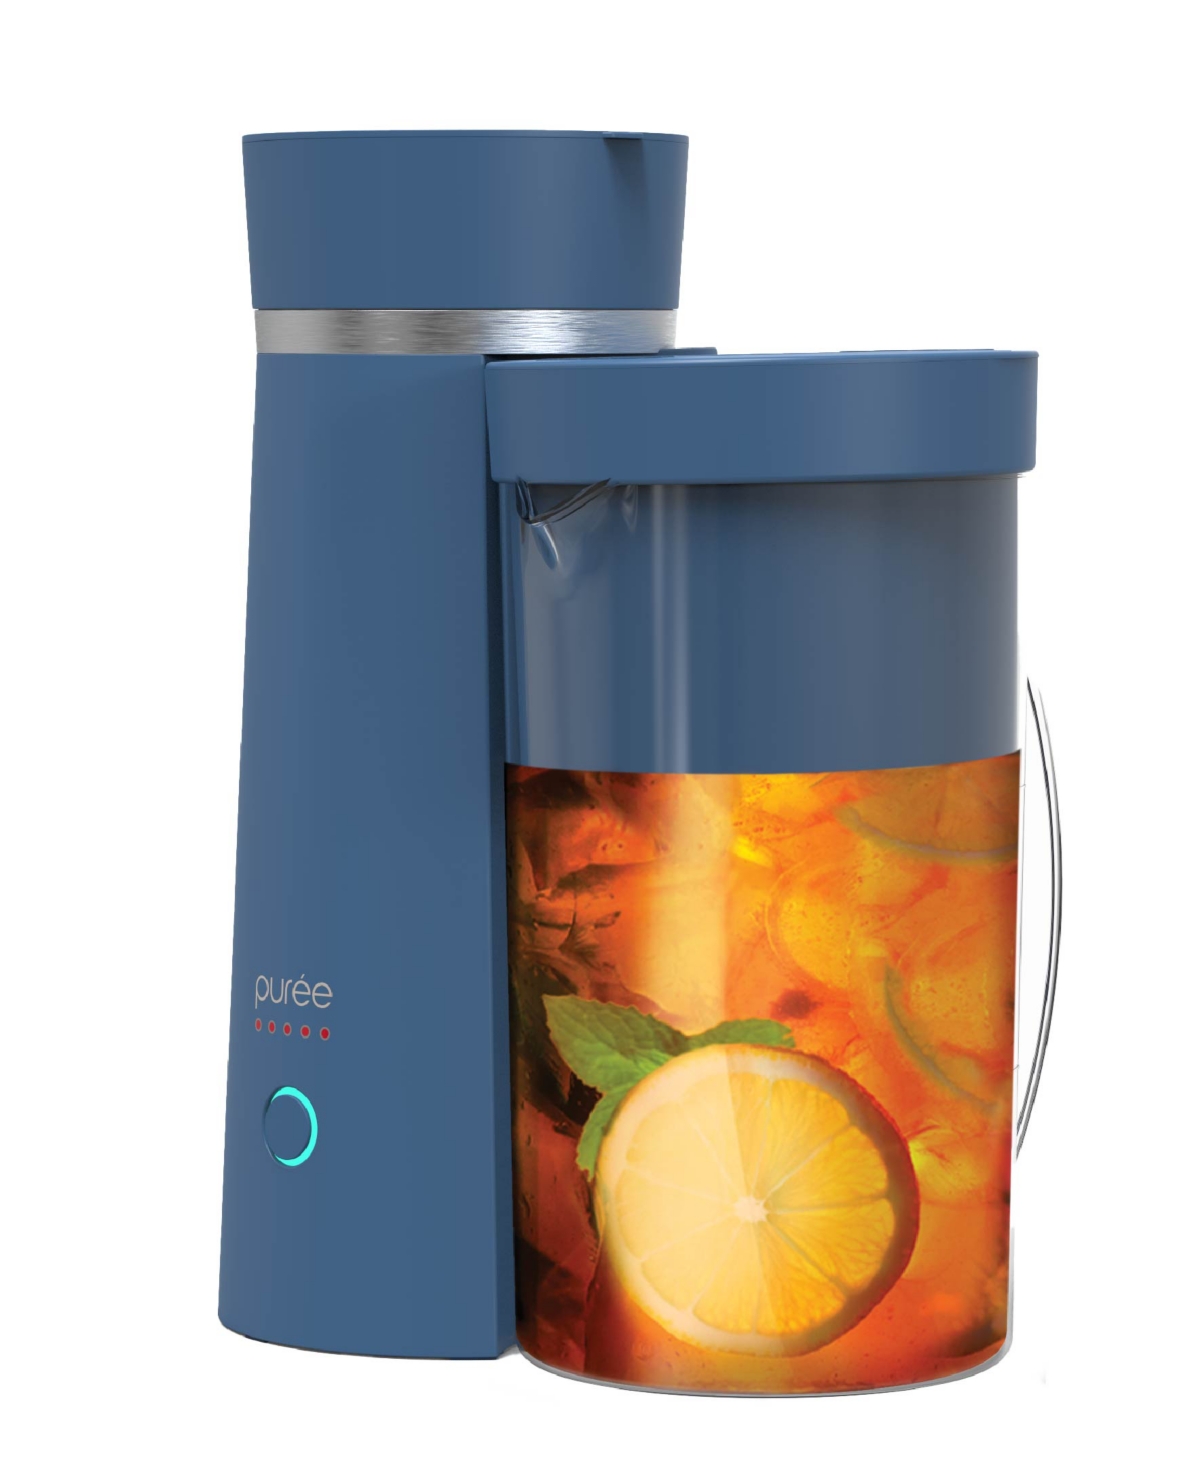 Tzumi Puree Iced Tea And Iced Coffee Maker, 2-quart In Blue